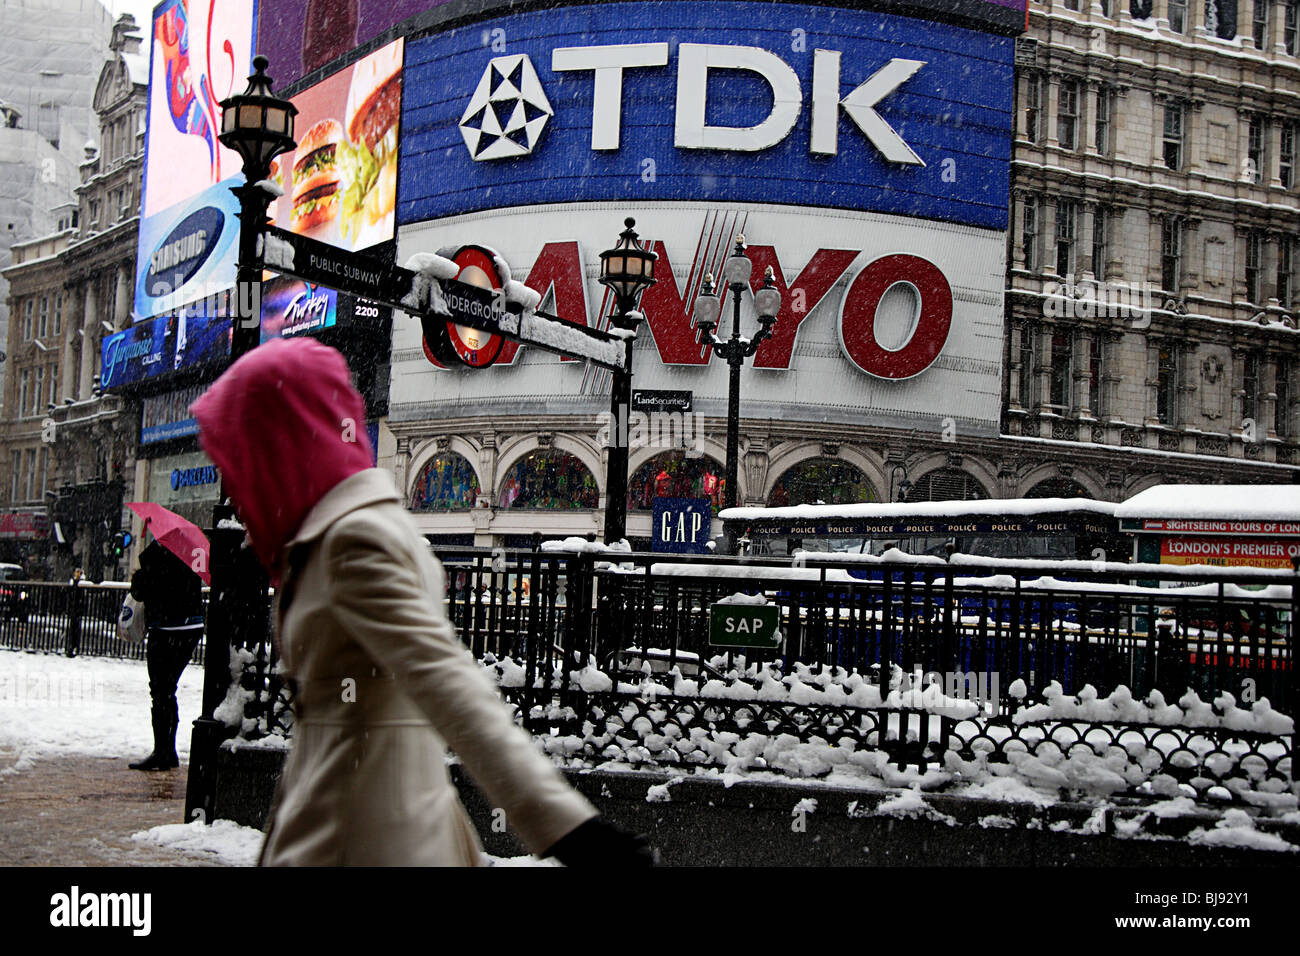 Life         Tis snowing in Piccadilly Circus, London Stock Photo